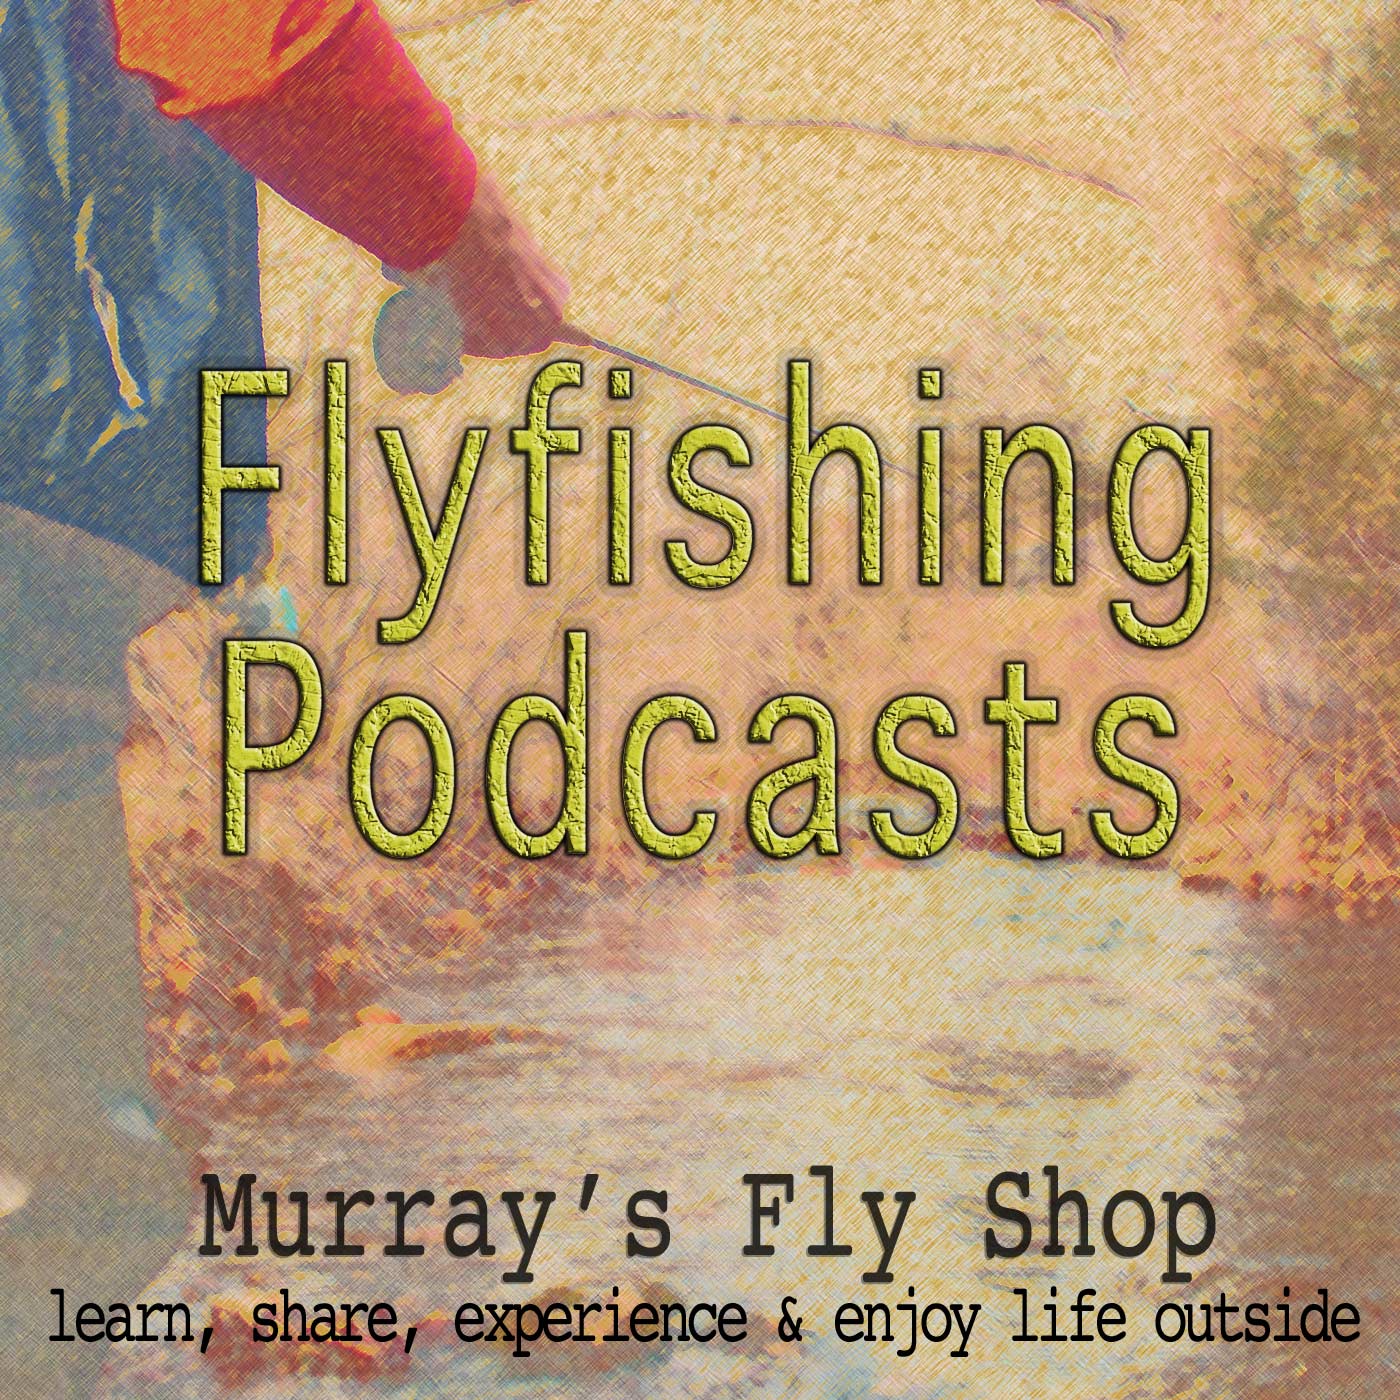 Murray's Fly Shop Fly Fishing Podcasts artwork